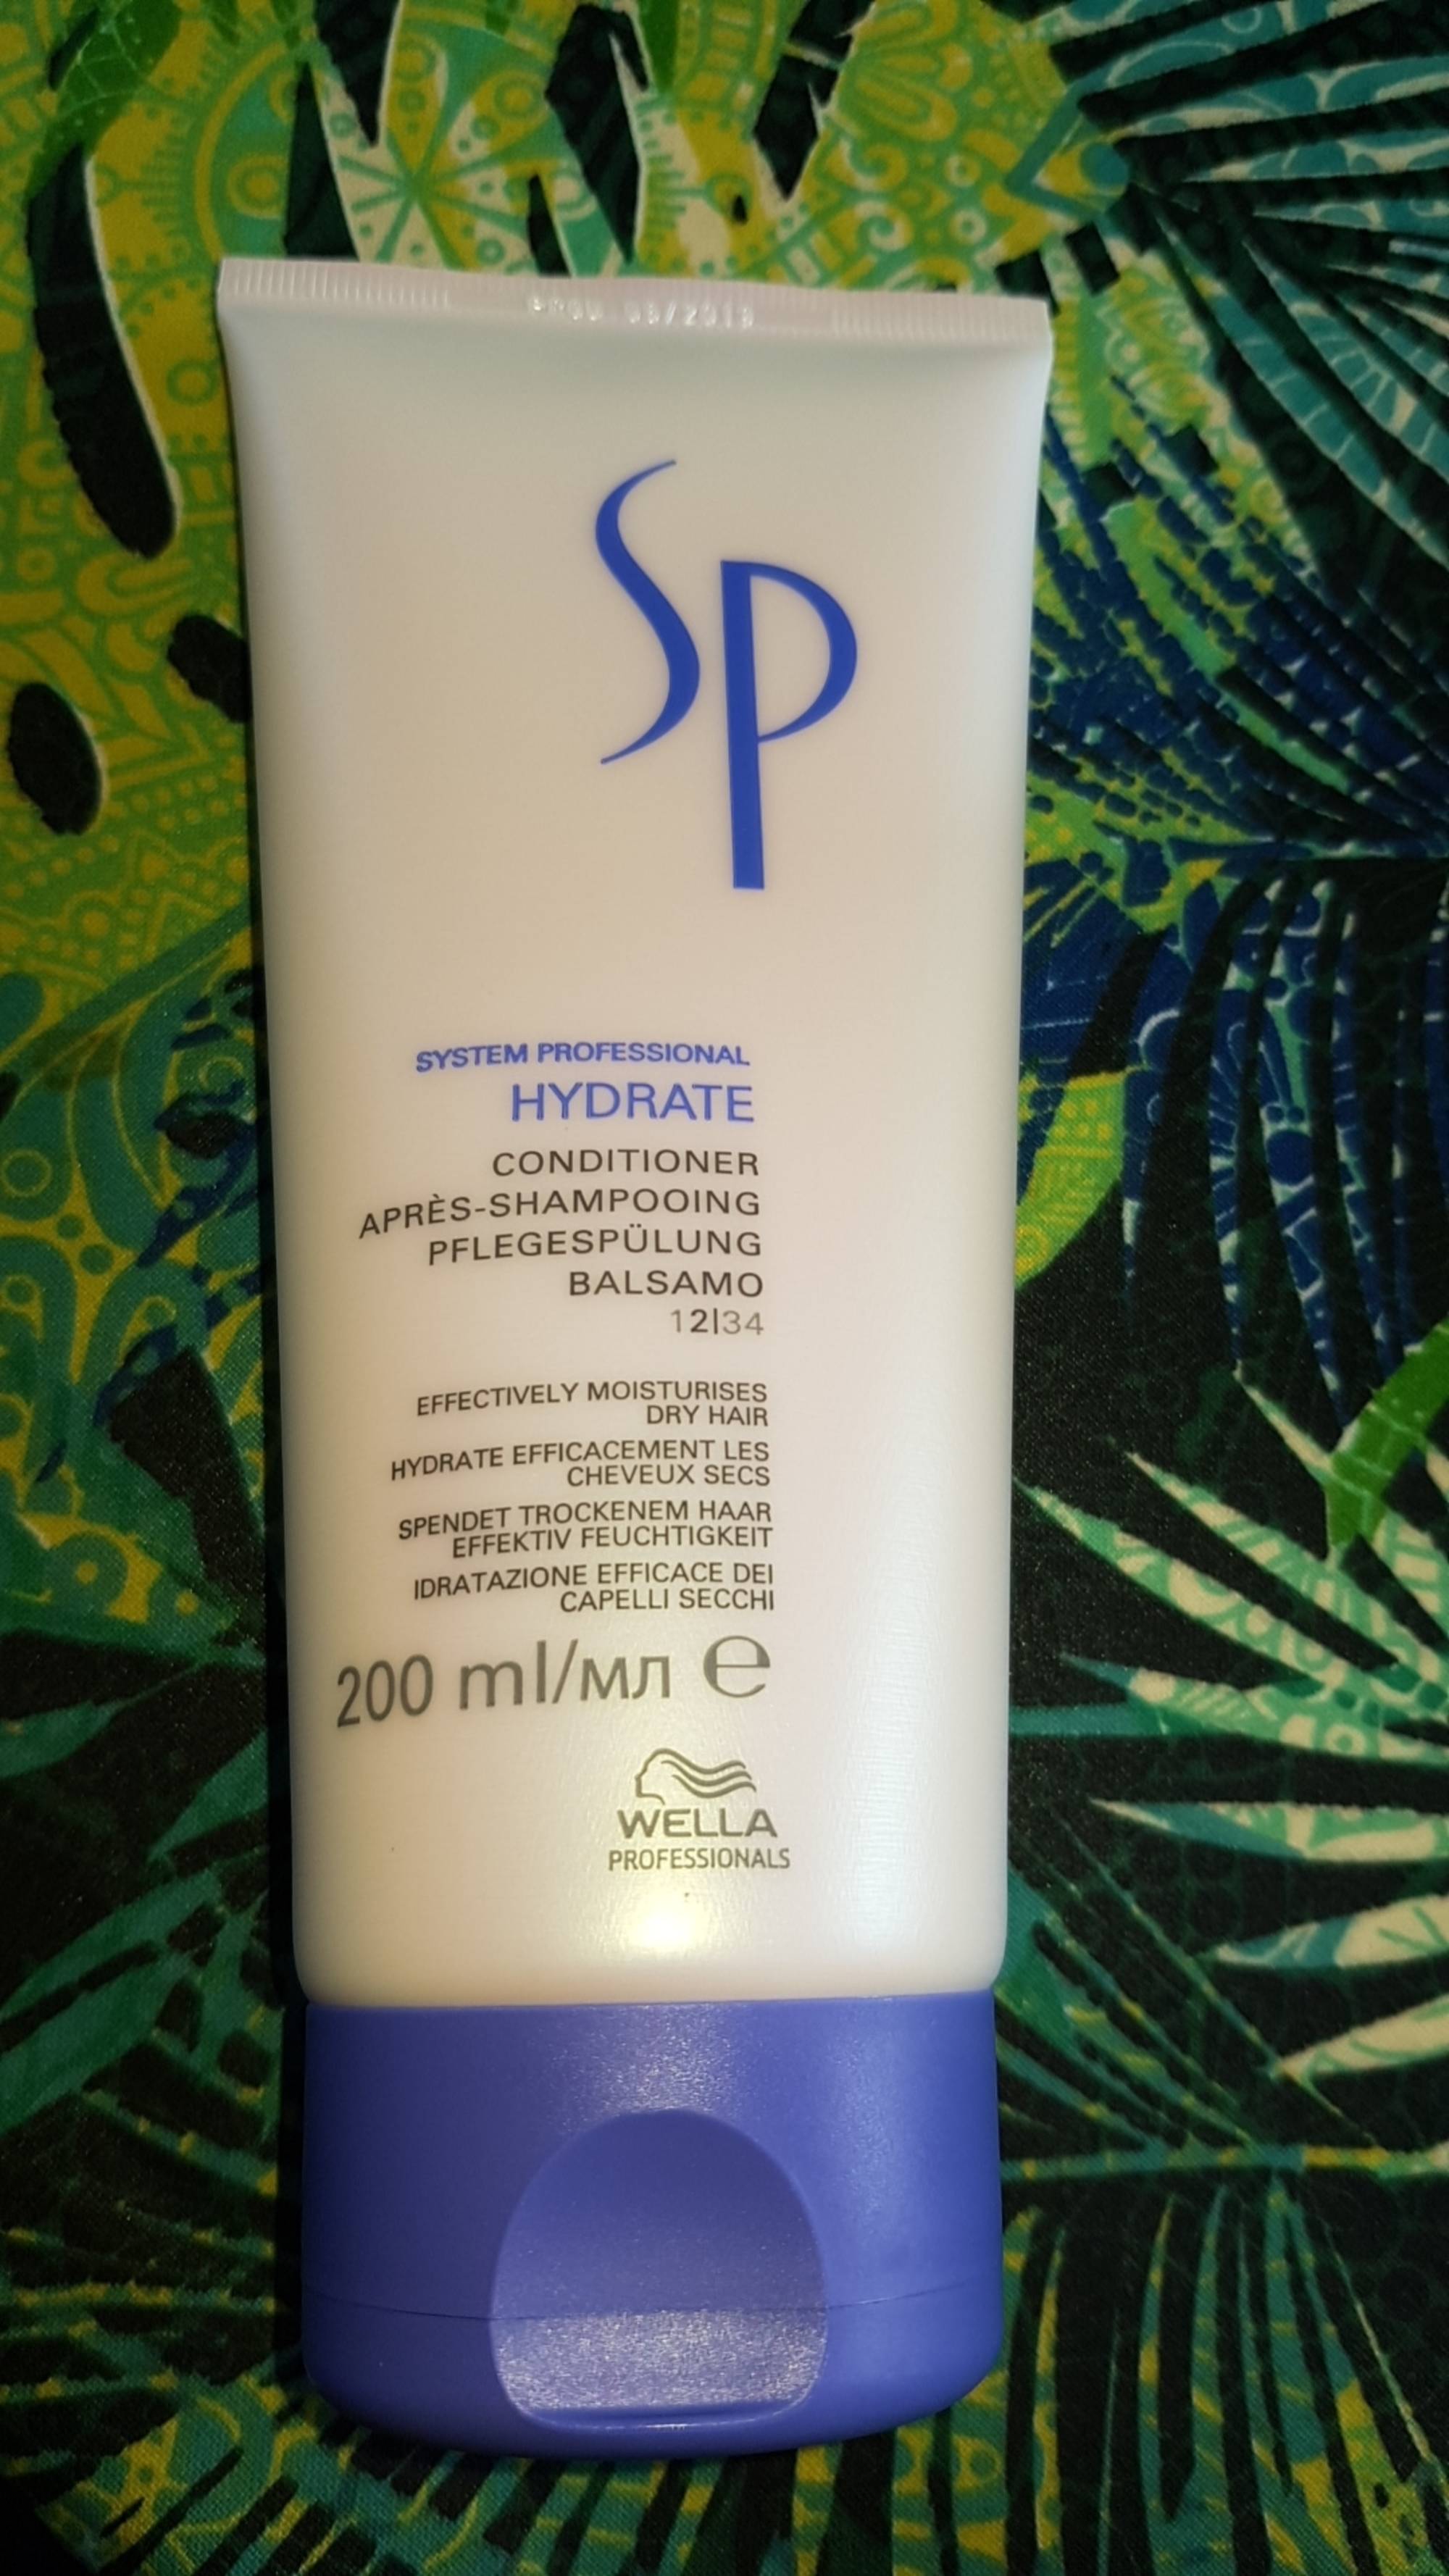 WELLA PROFESSIONALS - Systeme professional hydrate - Après shampooing